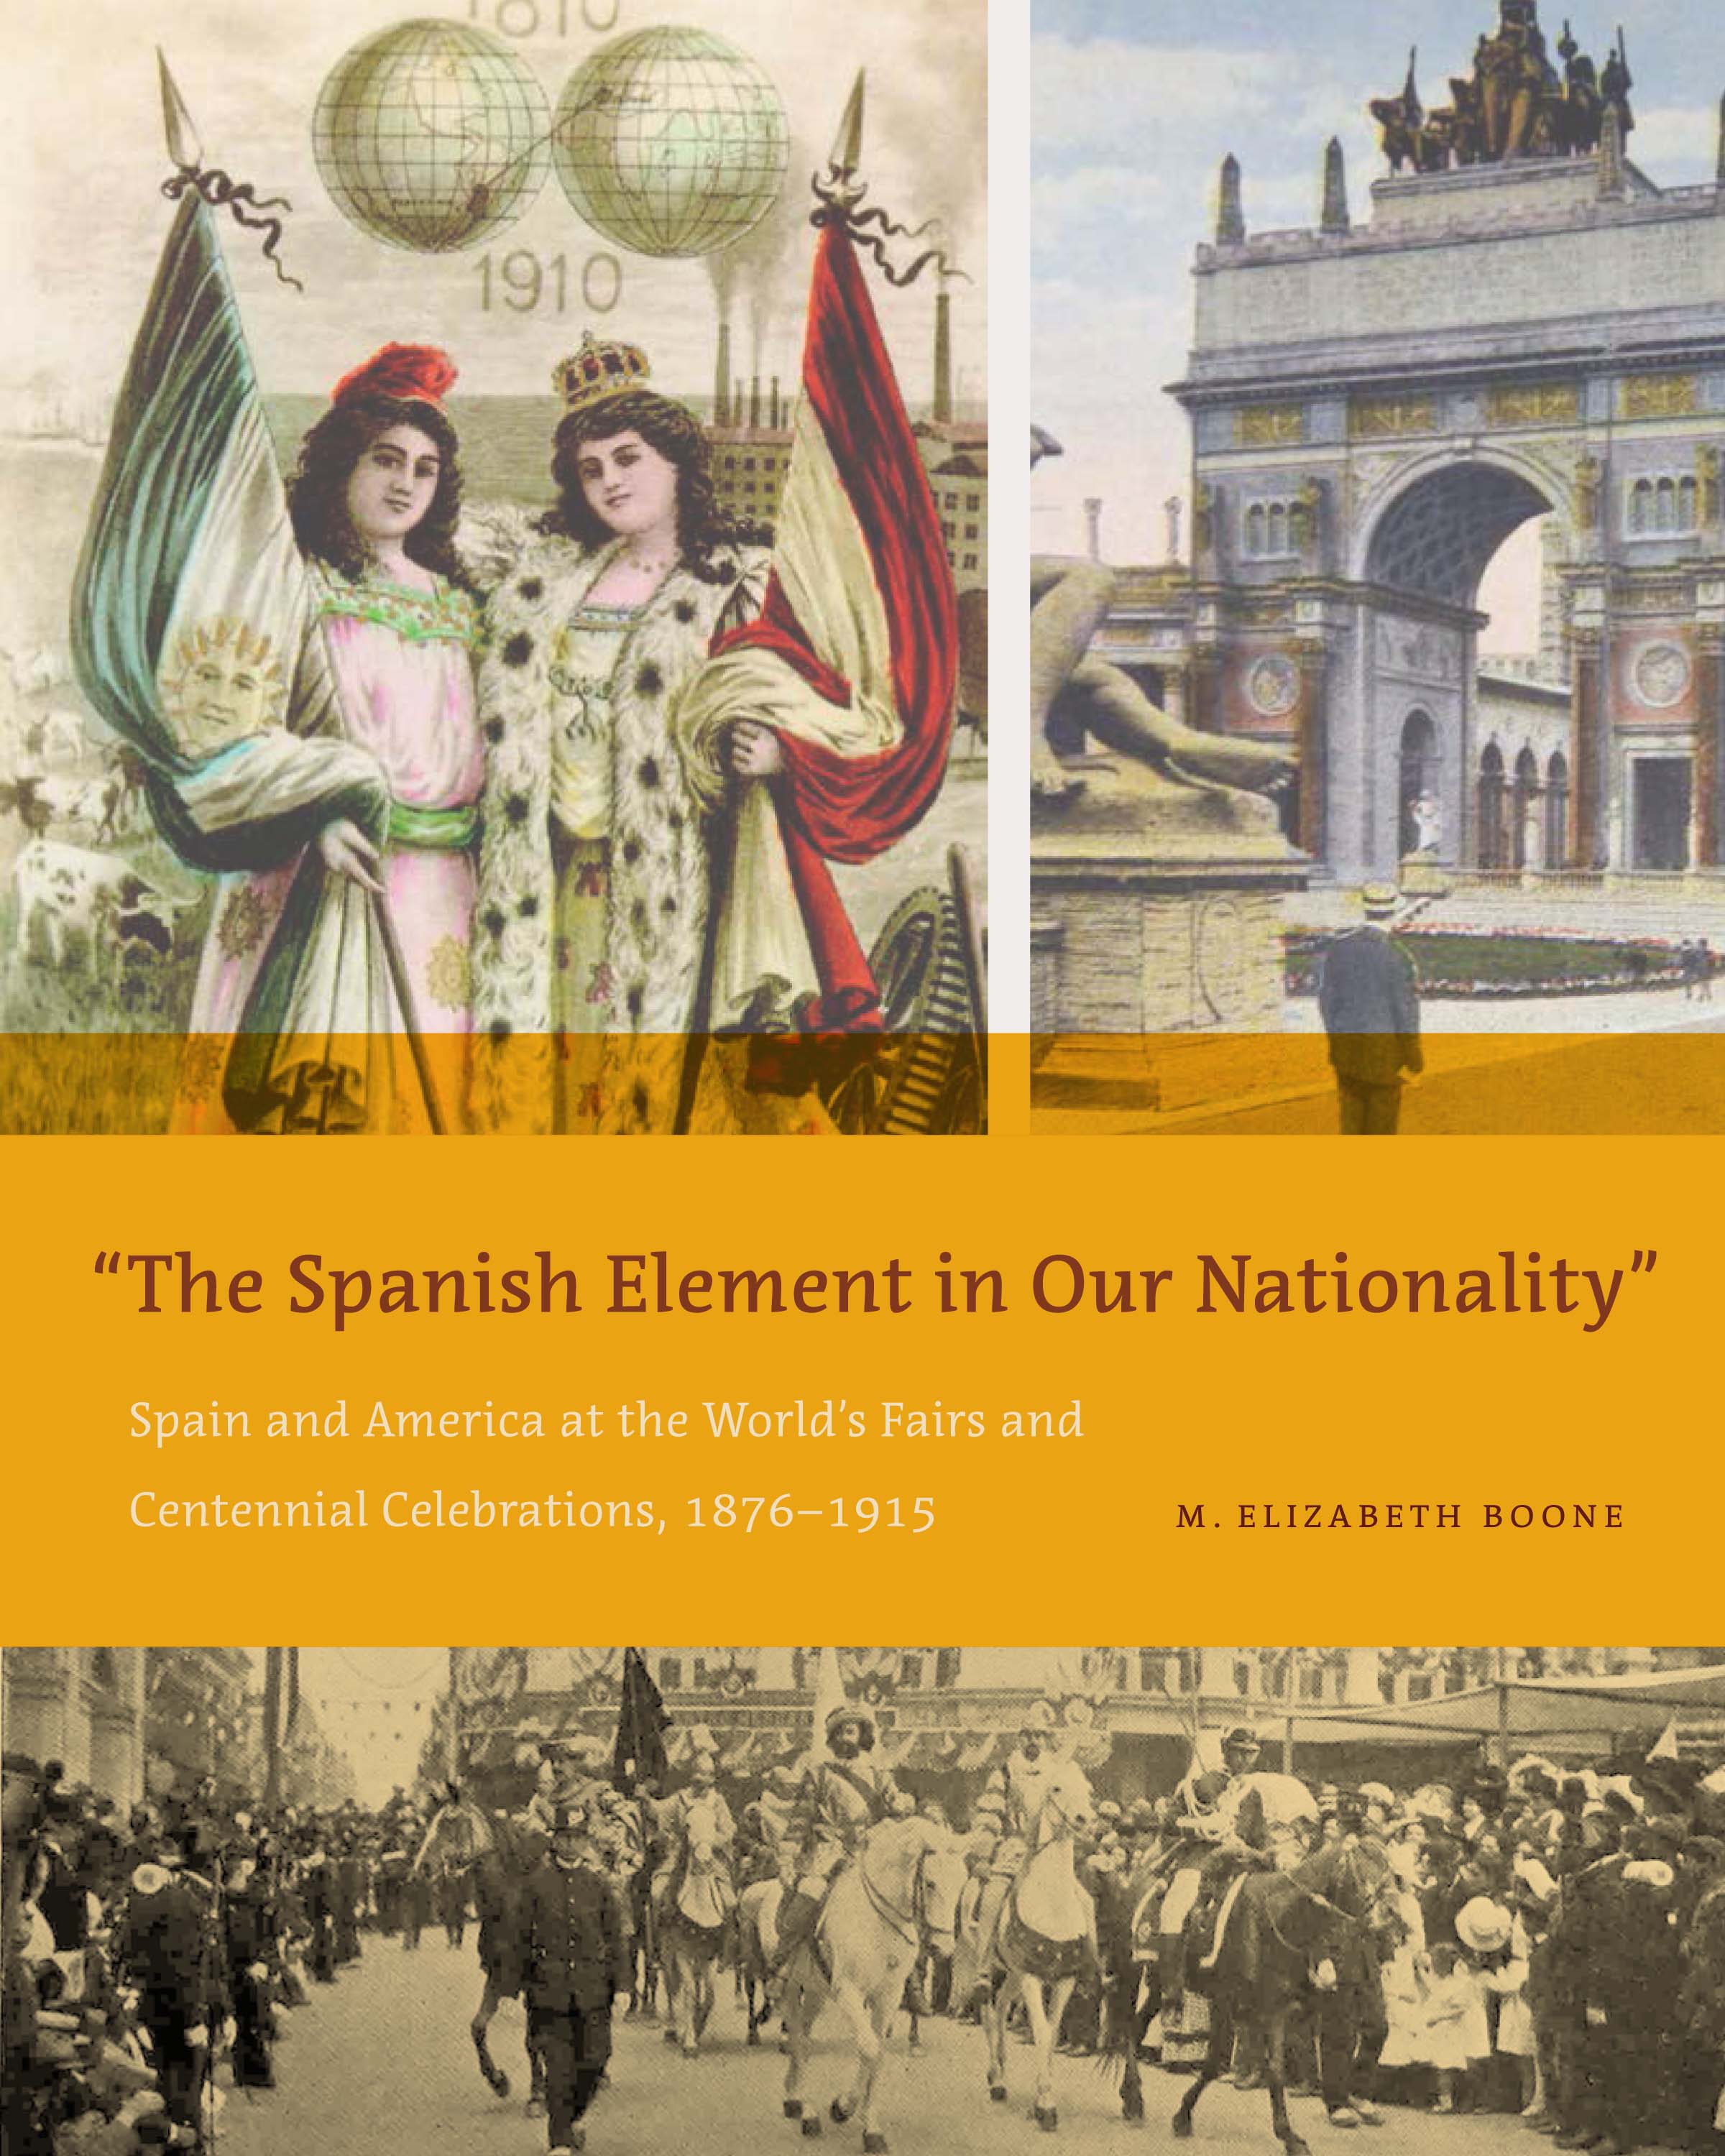 The Spanish Element in Our Nationality book cover